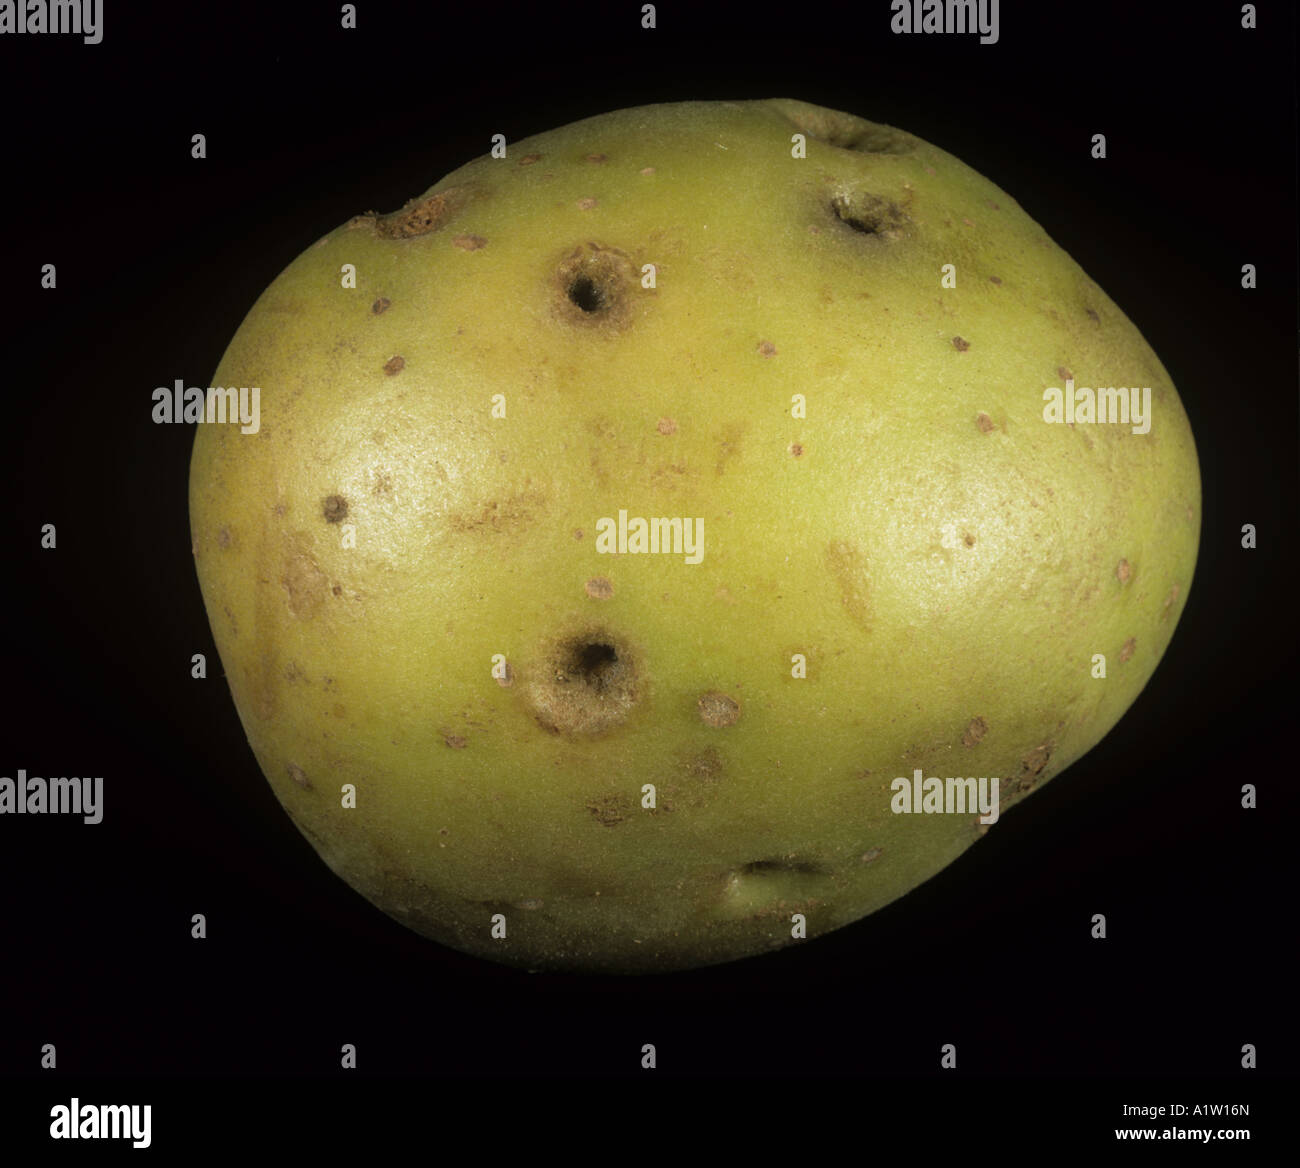 Black scurf Rhizoctonia solani holes or indentations in the skin surface of a potato tuber Stock Photo